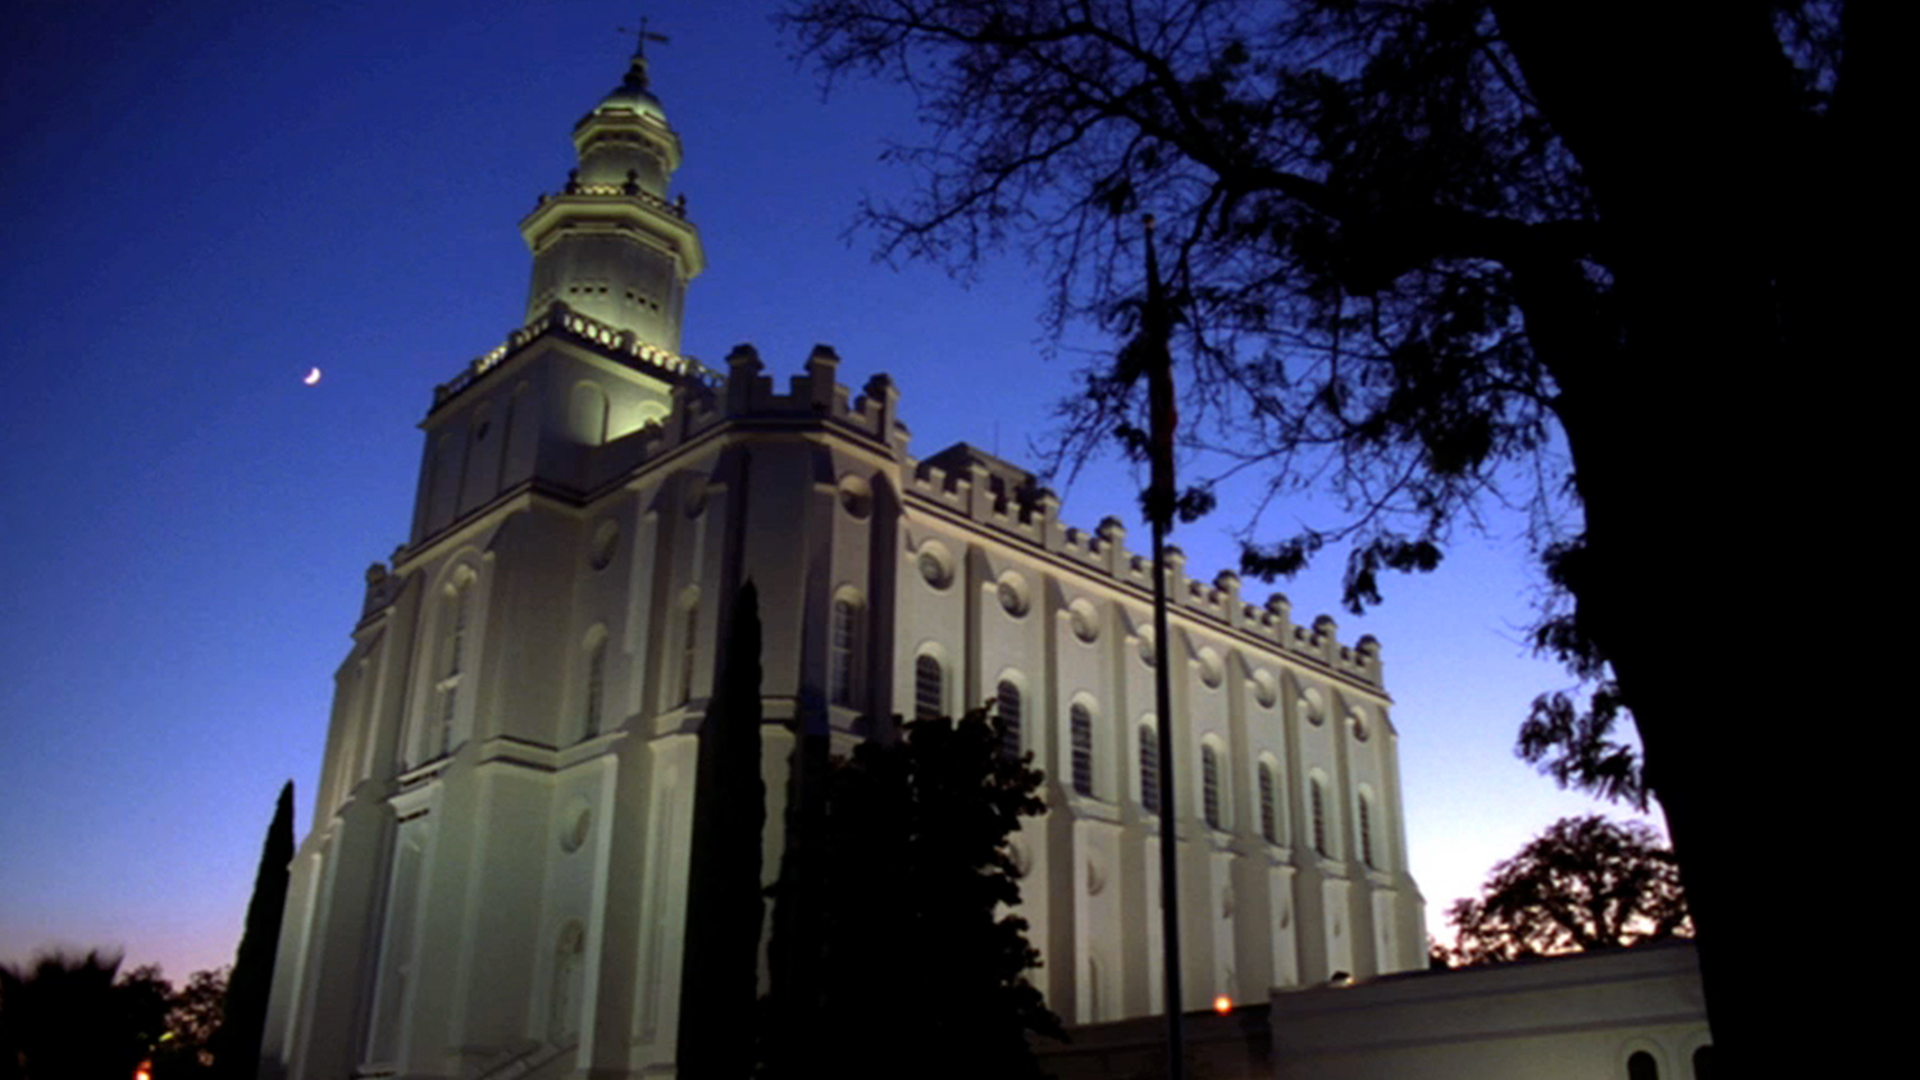 St. George Temple at night time